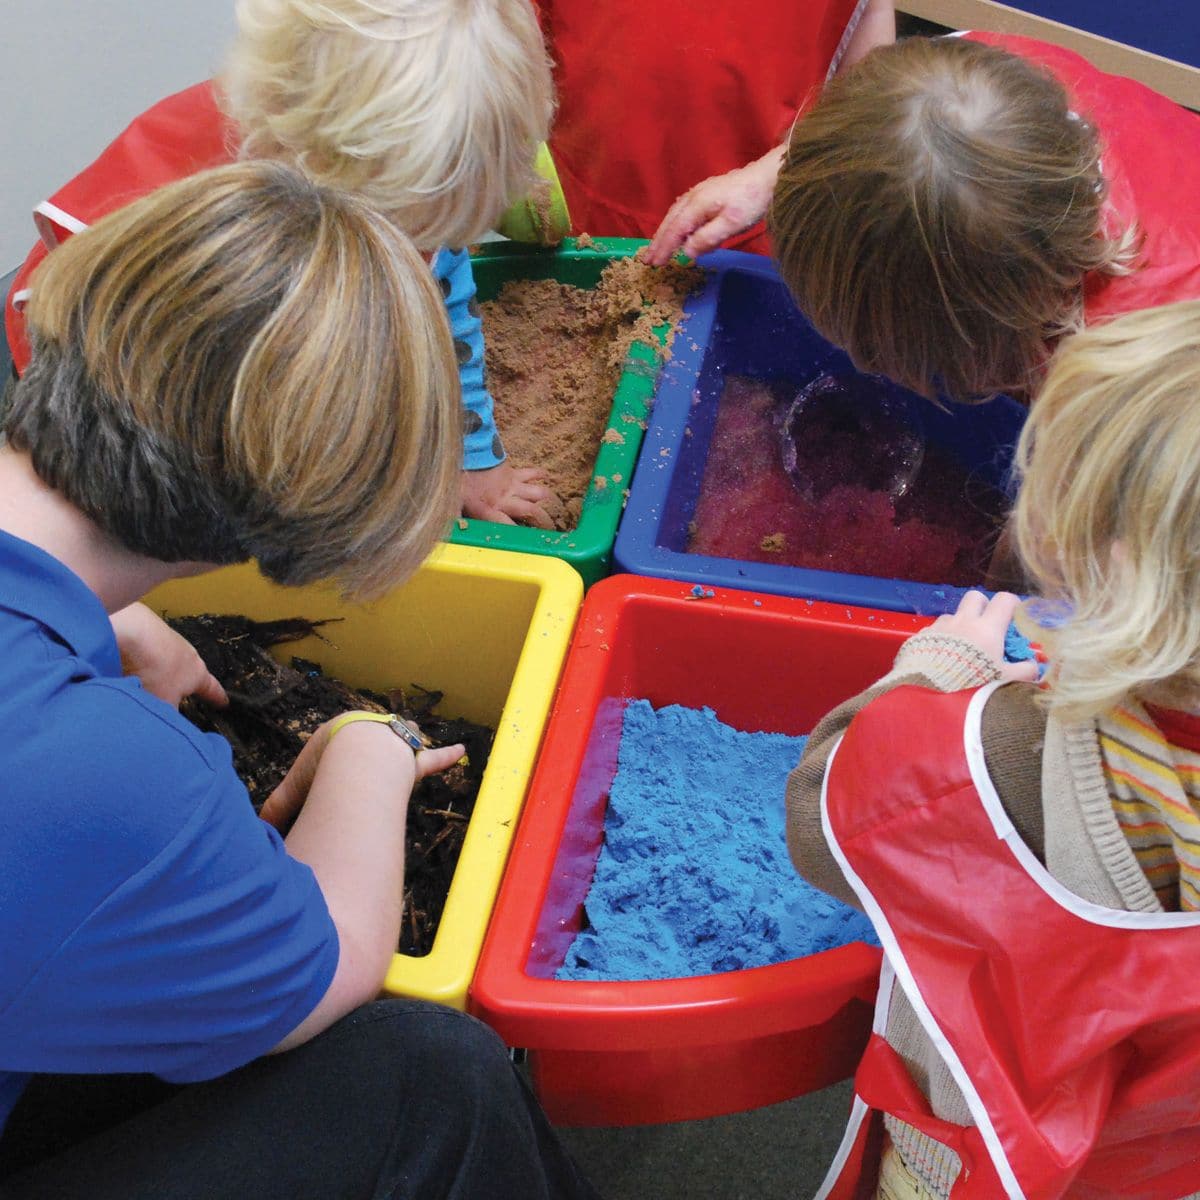 Exploration Circle Set Colour Trays, The Exploration Circle Set Colour Trays has 4 coloured quadrant trays with a grey metal stand forming a sturdy activity circle. Using the Exploration Circle Set Colour Trays,Children can play and discover the properties of sand, water, confetti, wood chippings or whatever medium you decide to place into the handy sized trays which are easy to manage, clean, lift and empty with this stunning Exploration Circle Set Colour Trays. The Exploration Circle Set Colour Trays is i